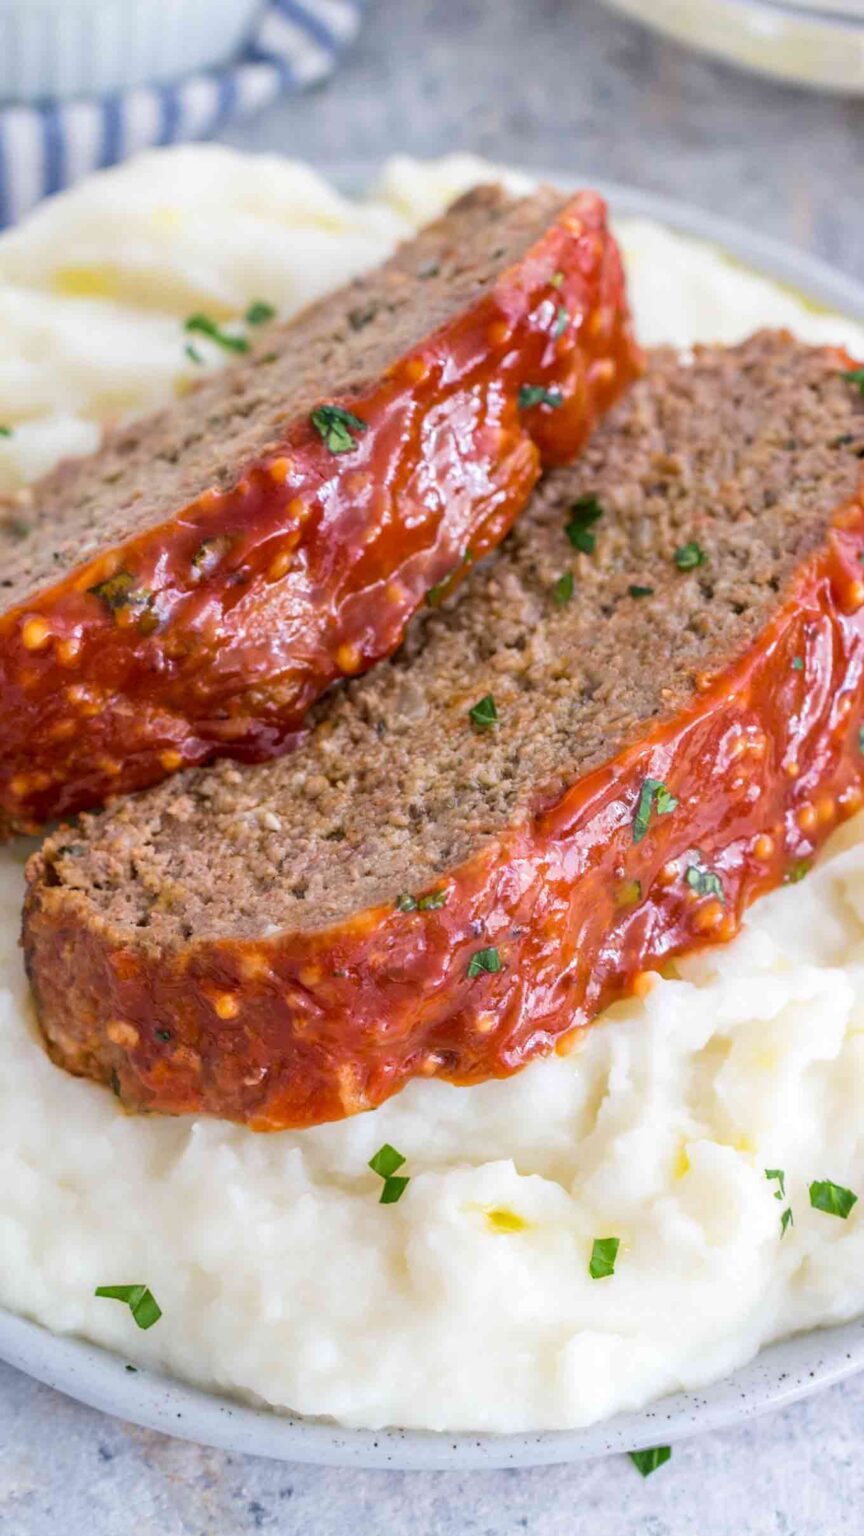 Best Meatloaf Recipe [VIDEO] - Sweet and Savory Meals